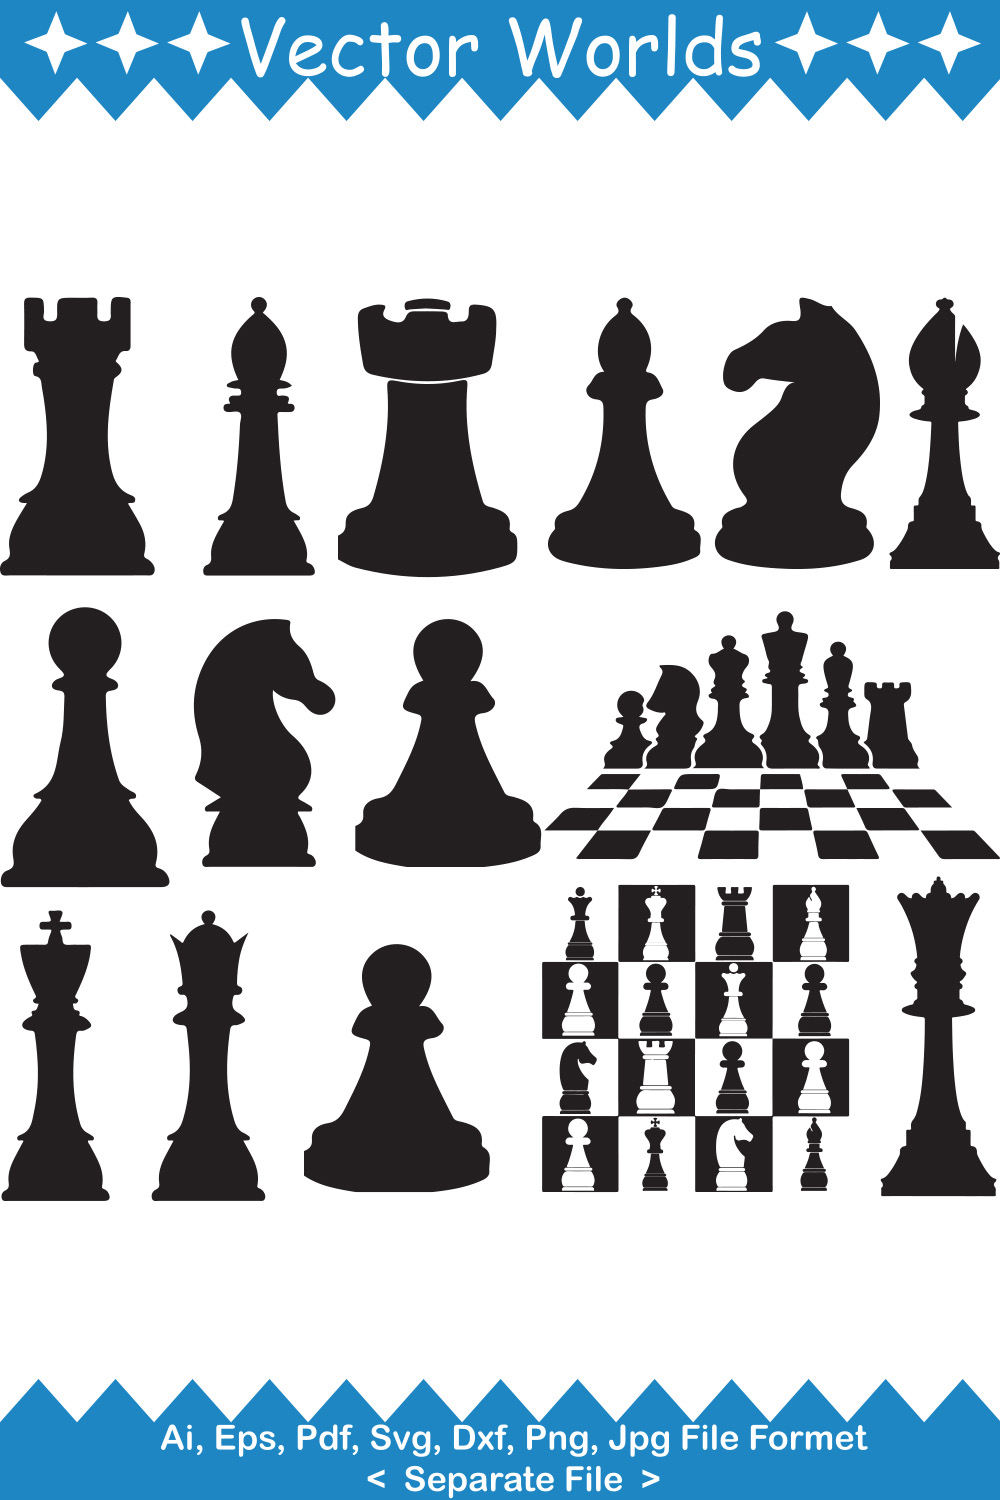 Set of charming vector image of chess.